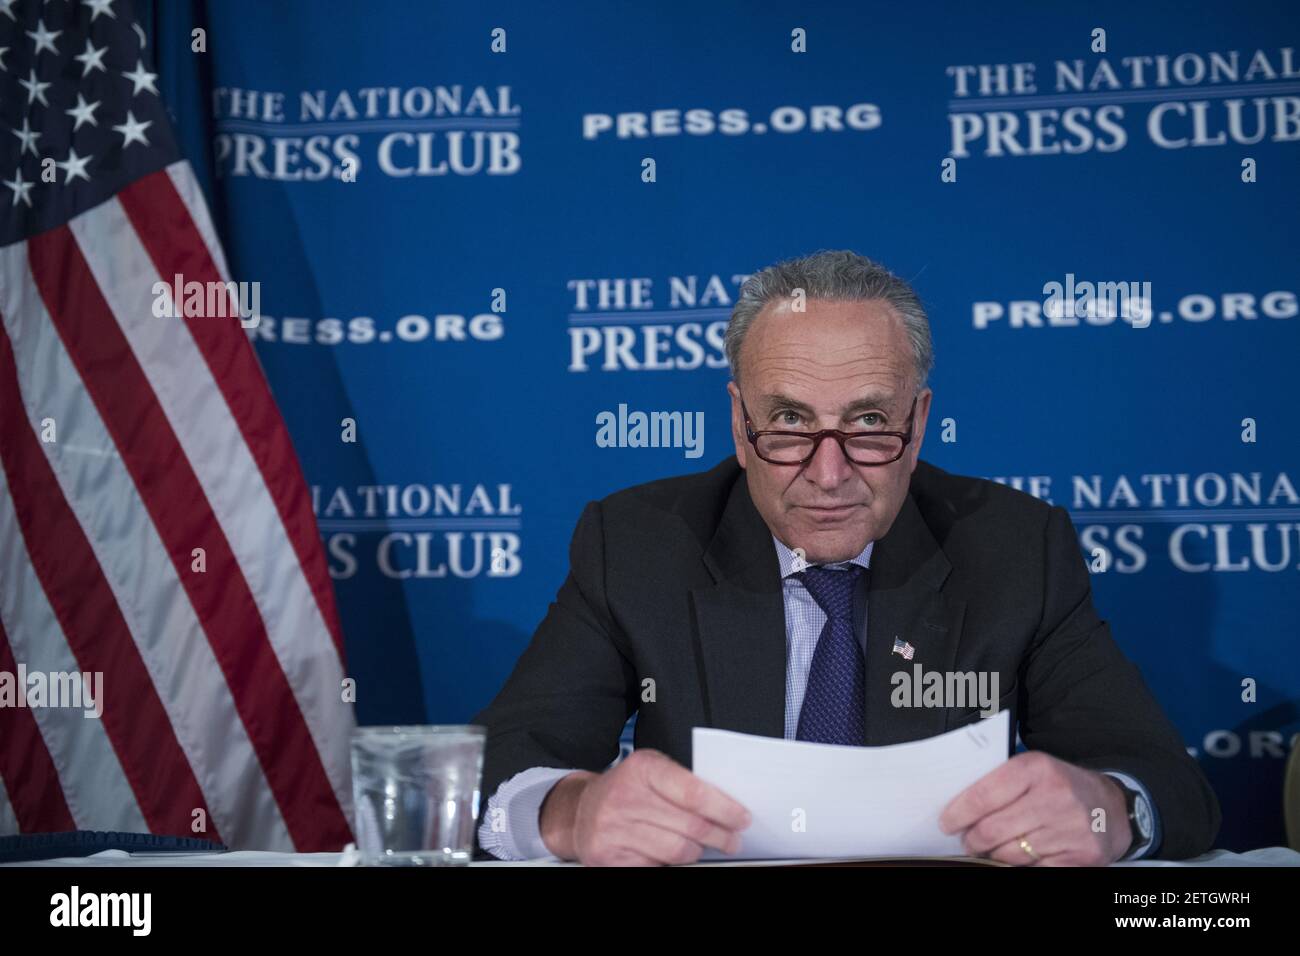 UNITED STATES - FEBRUARY 27: Senate Minority Leader Charles Schumer, D-N.Y., and House Minority Leader Nancy Pelosi, D-Calif., not pictured, deliver a prebuttal at the National Press Club to tomorrow's address to a joint session of Congress by President Donald Trump, February 27, 2017. (Photo By Tom Williams/CQ Roll Call) *** Please Use Credit from Credit Field *** Stock Photo